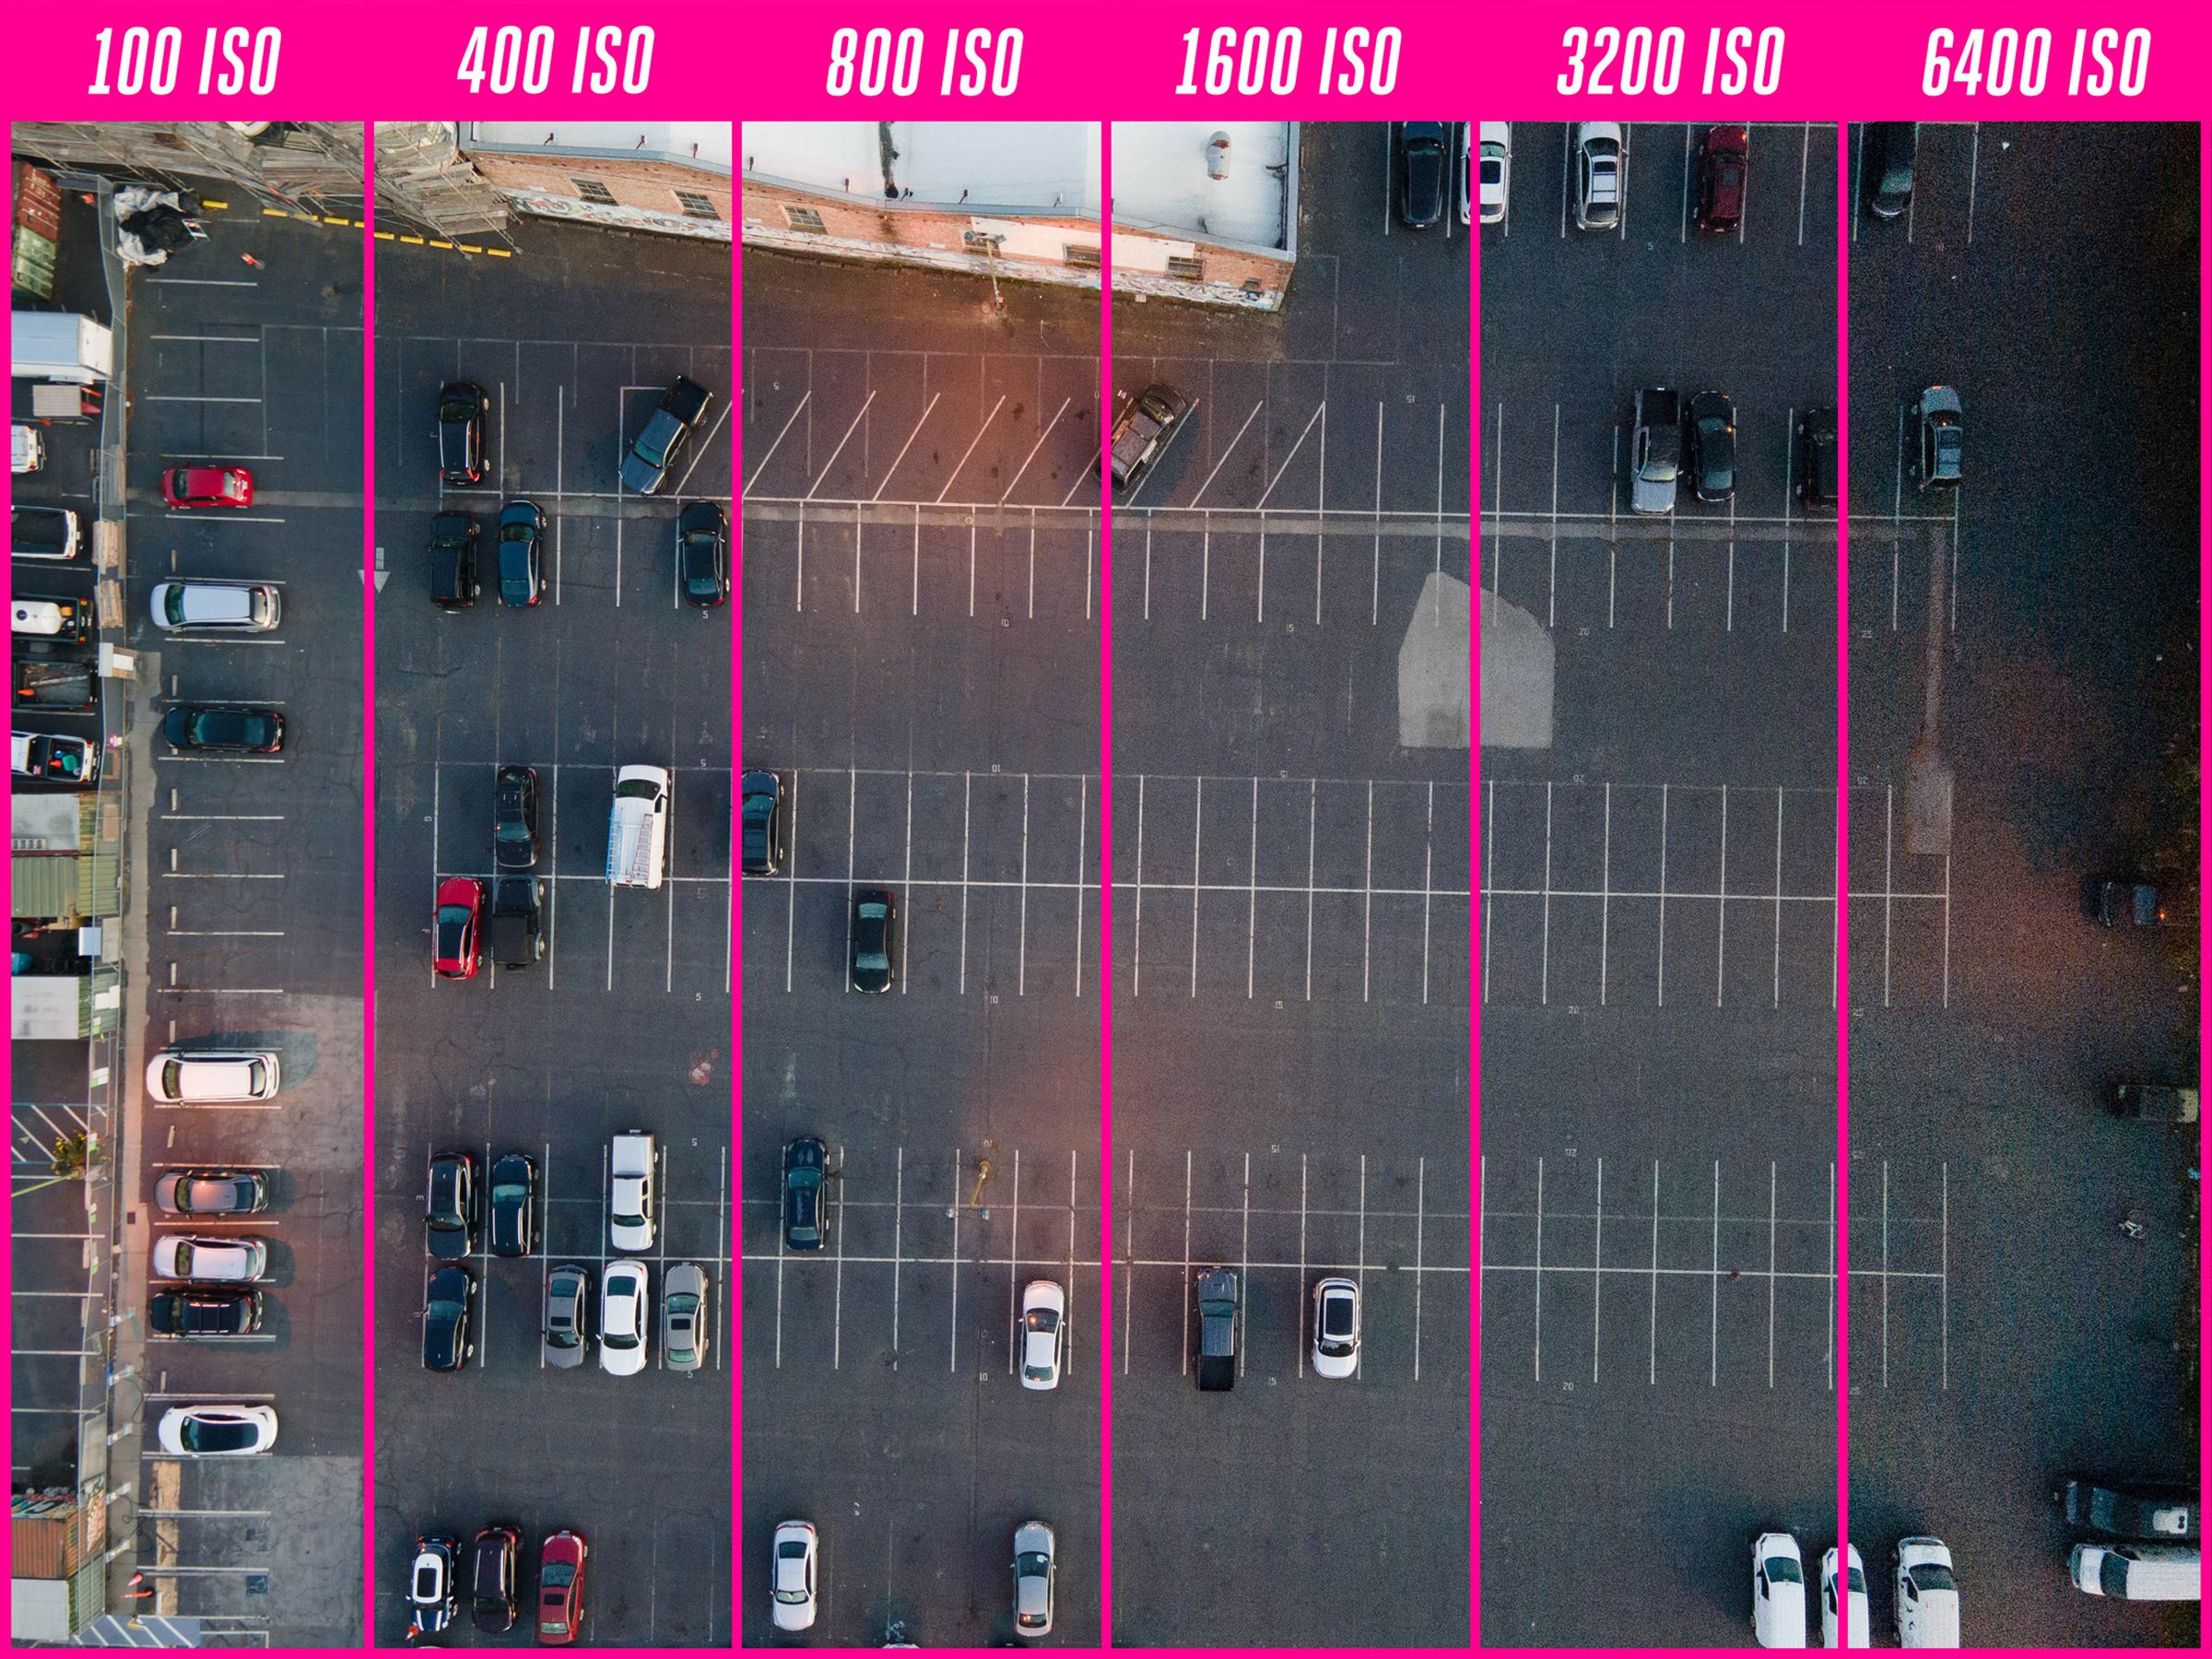 Here’s how the Mavic Air 2 handles noise at various ISO settings. You can see it gets noticeably grainier as you get past 800 ISO.